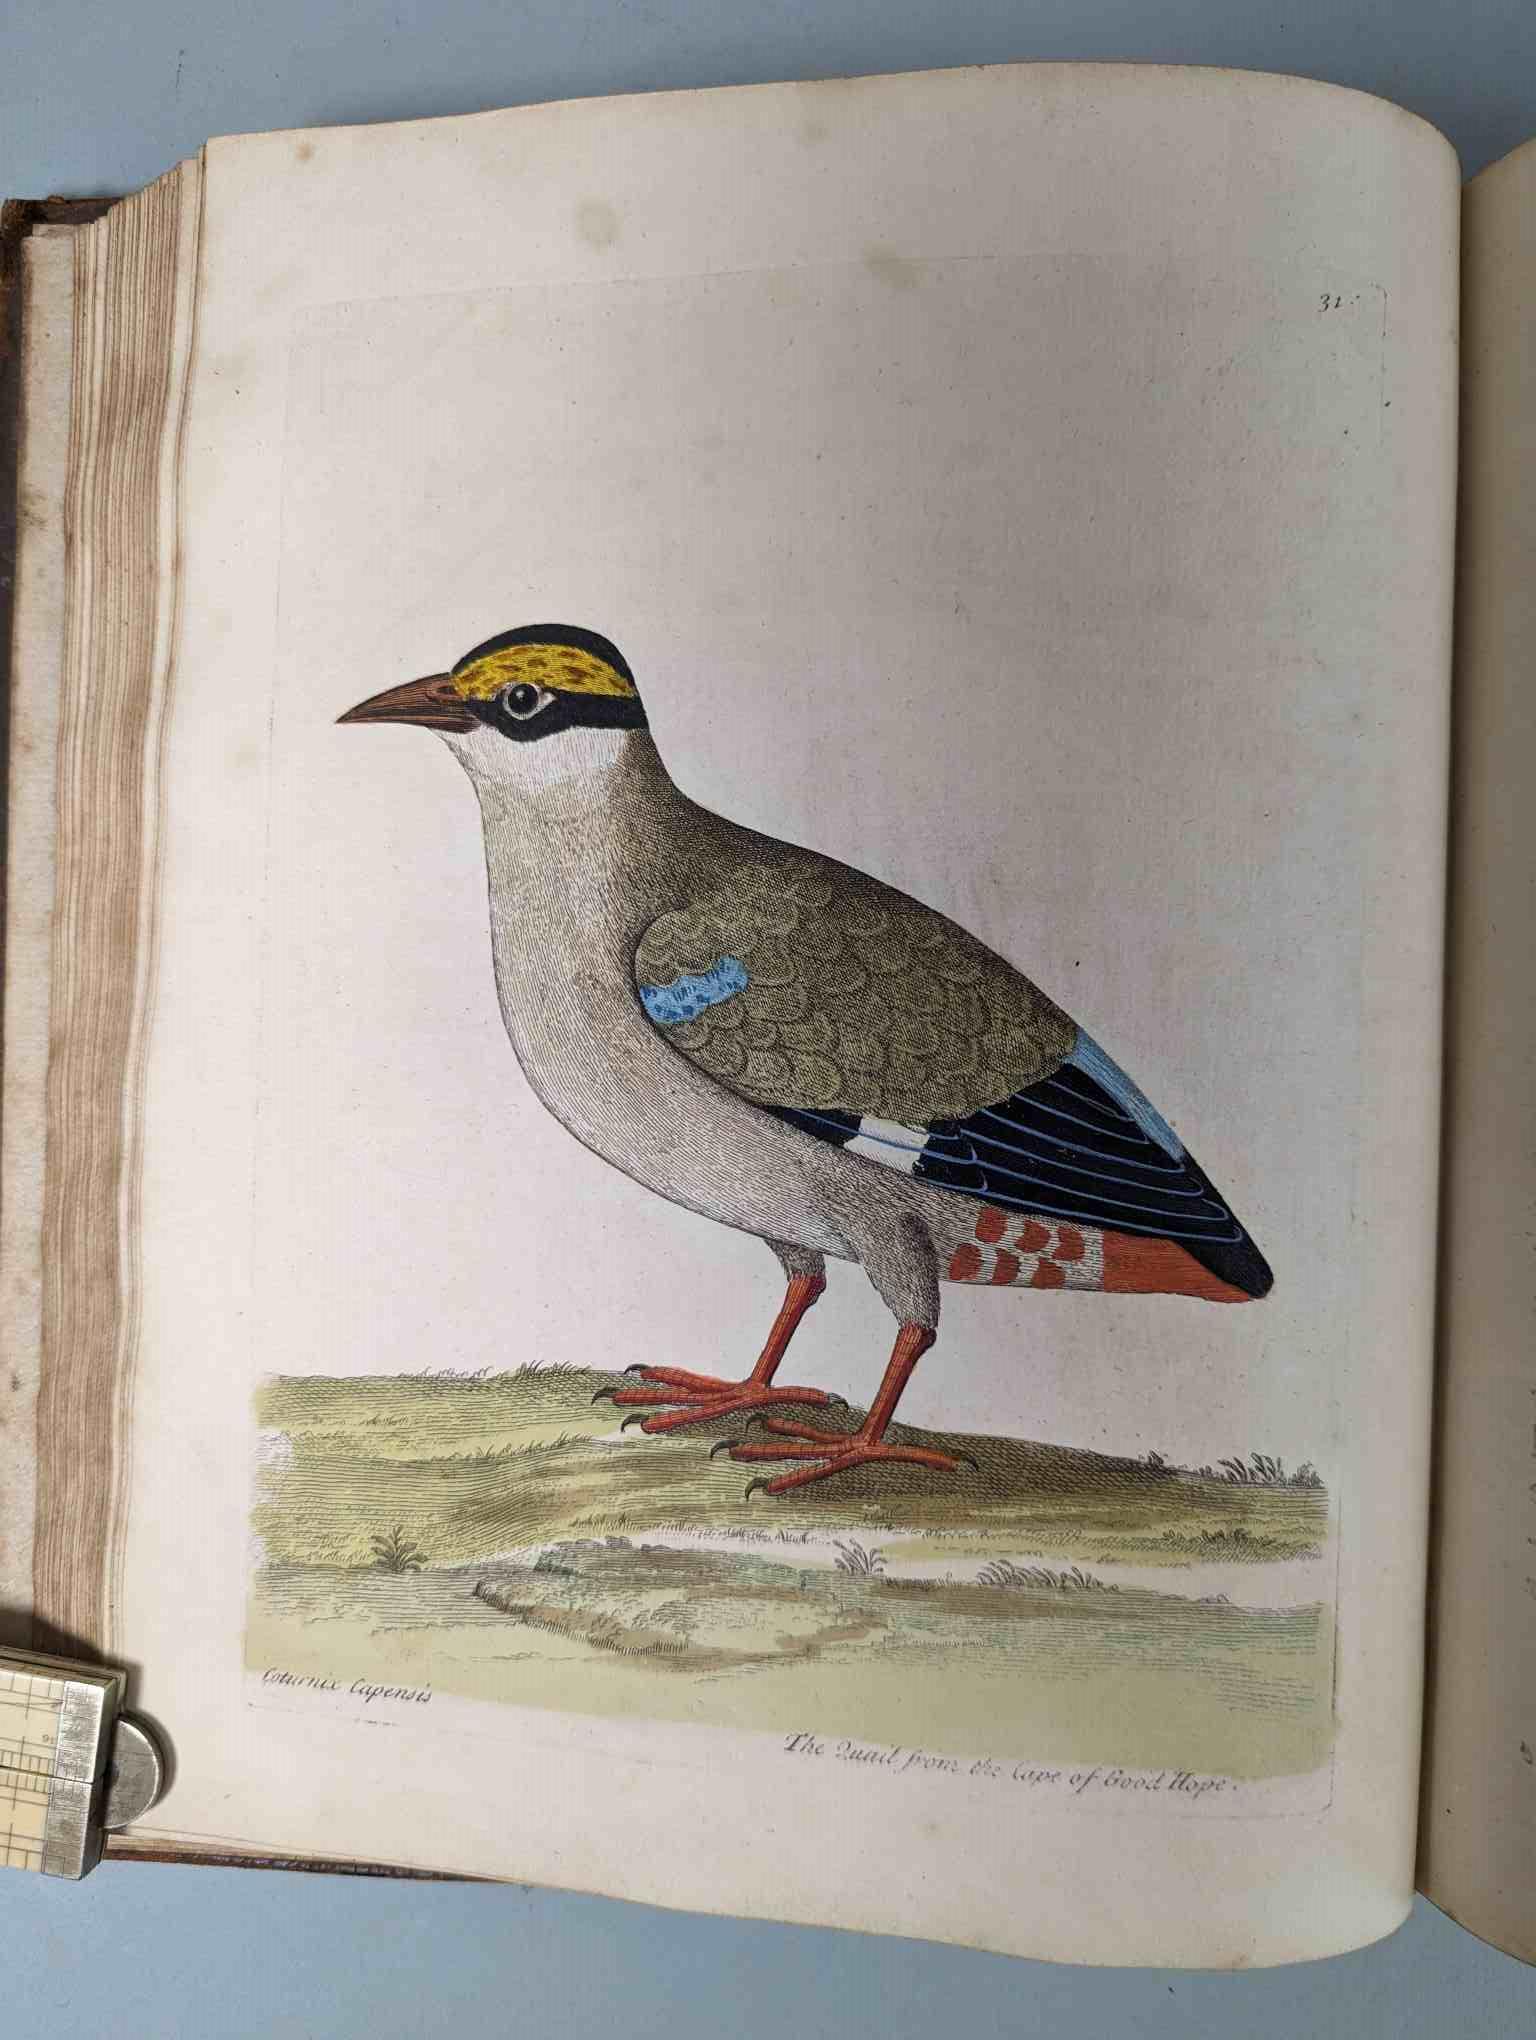 ALBIN, Eleazar. A Natural History of Birds, to which are added, Notes and Observations by W. - Image 34 of 208